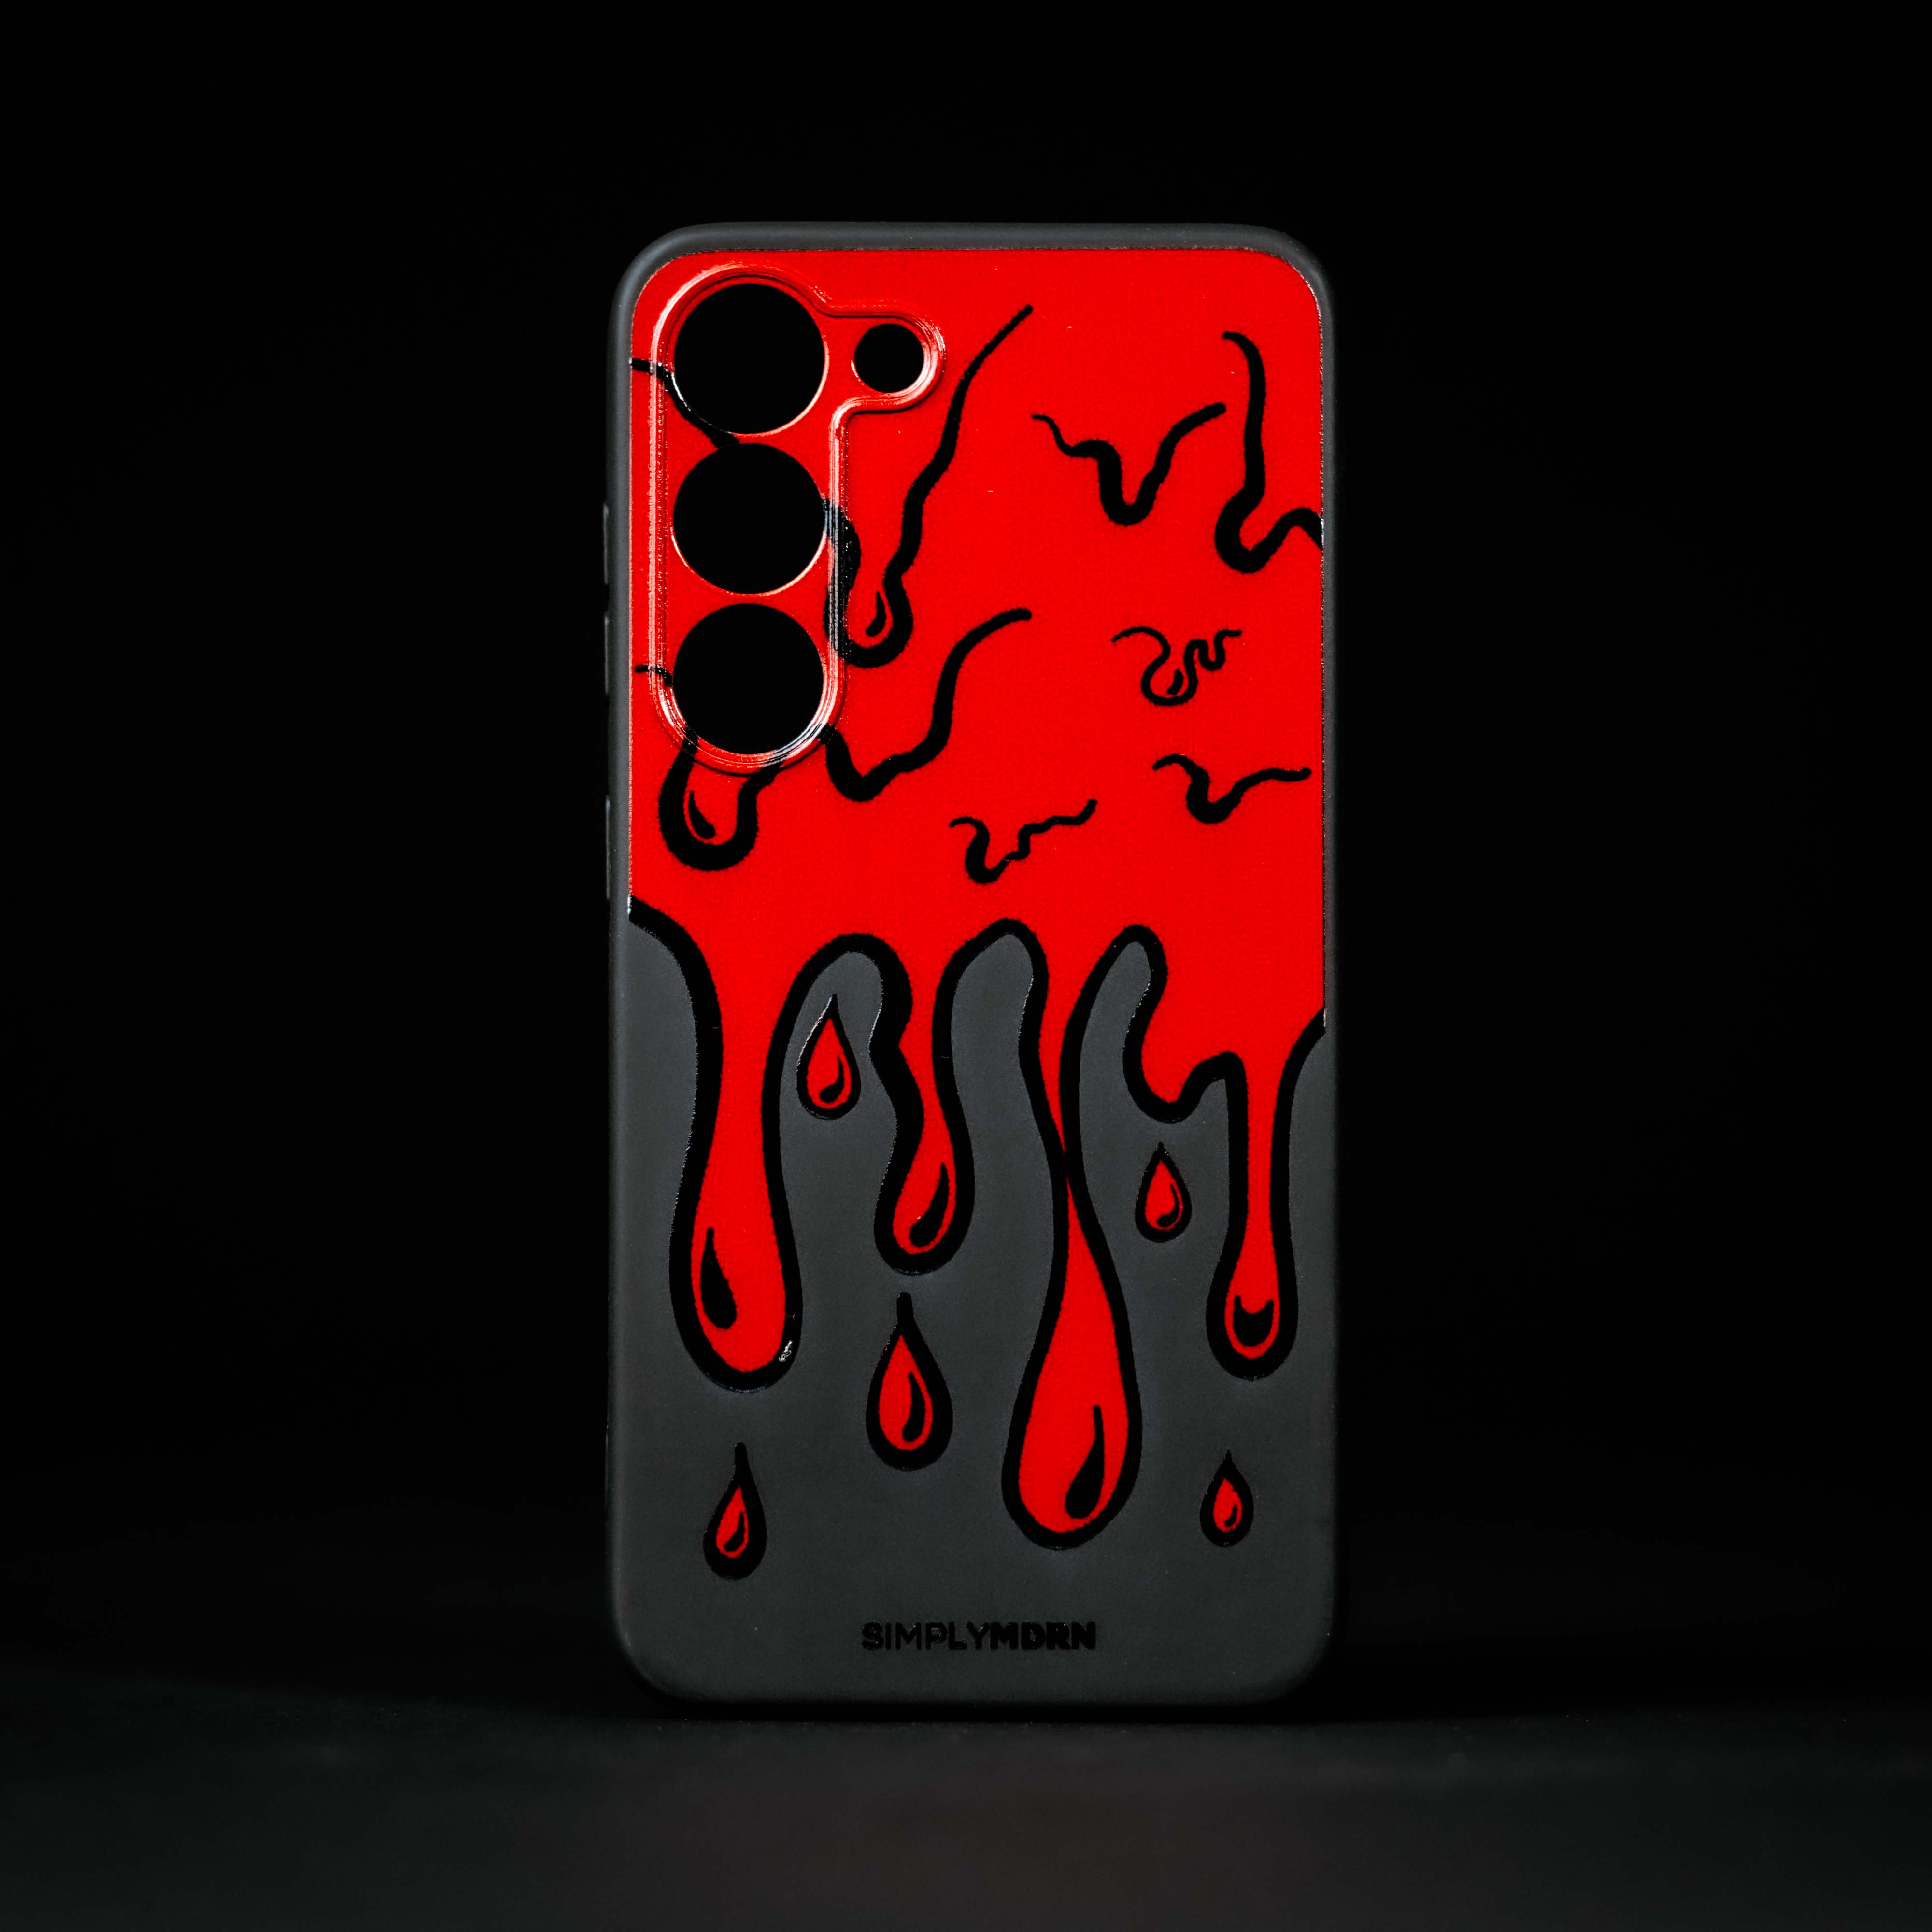 DRIPPY Slim Android phone case